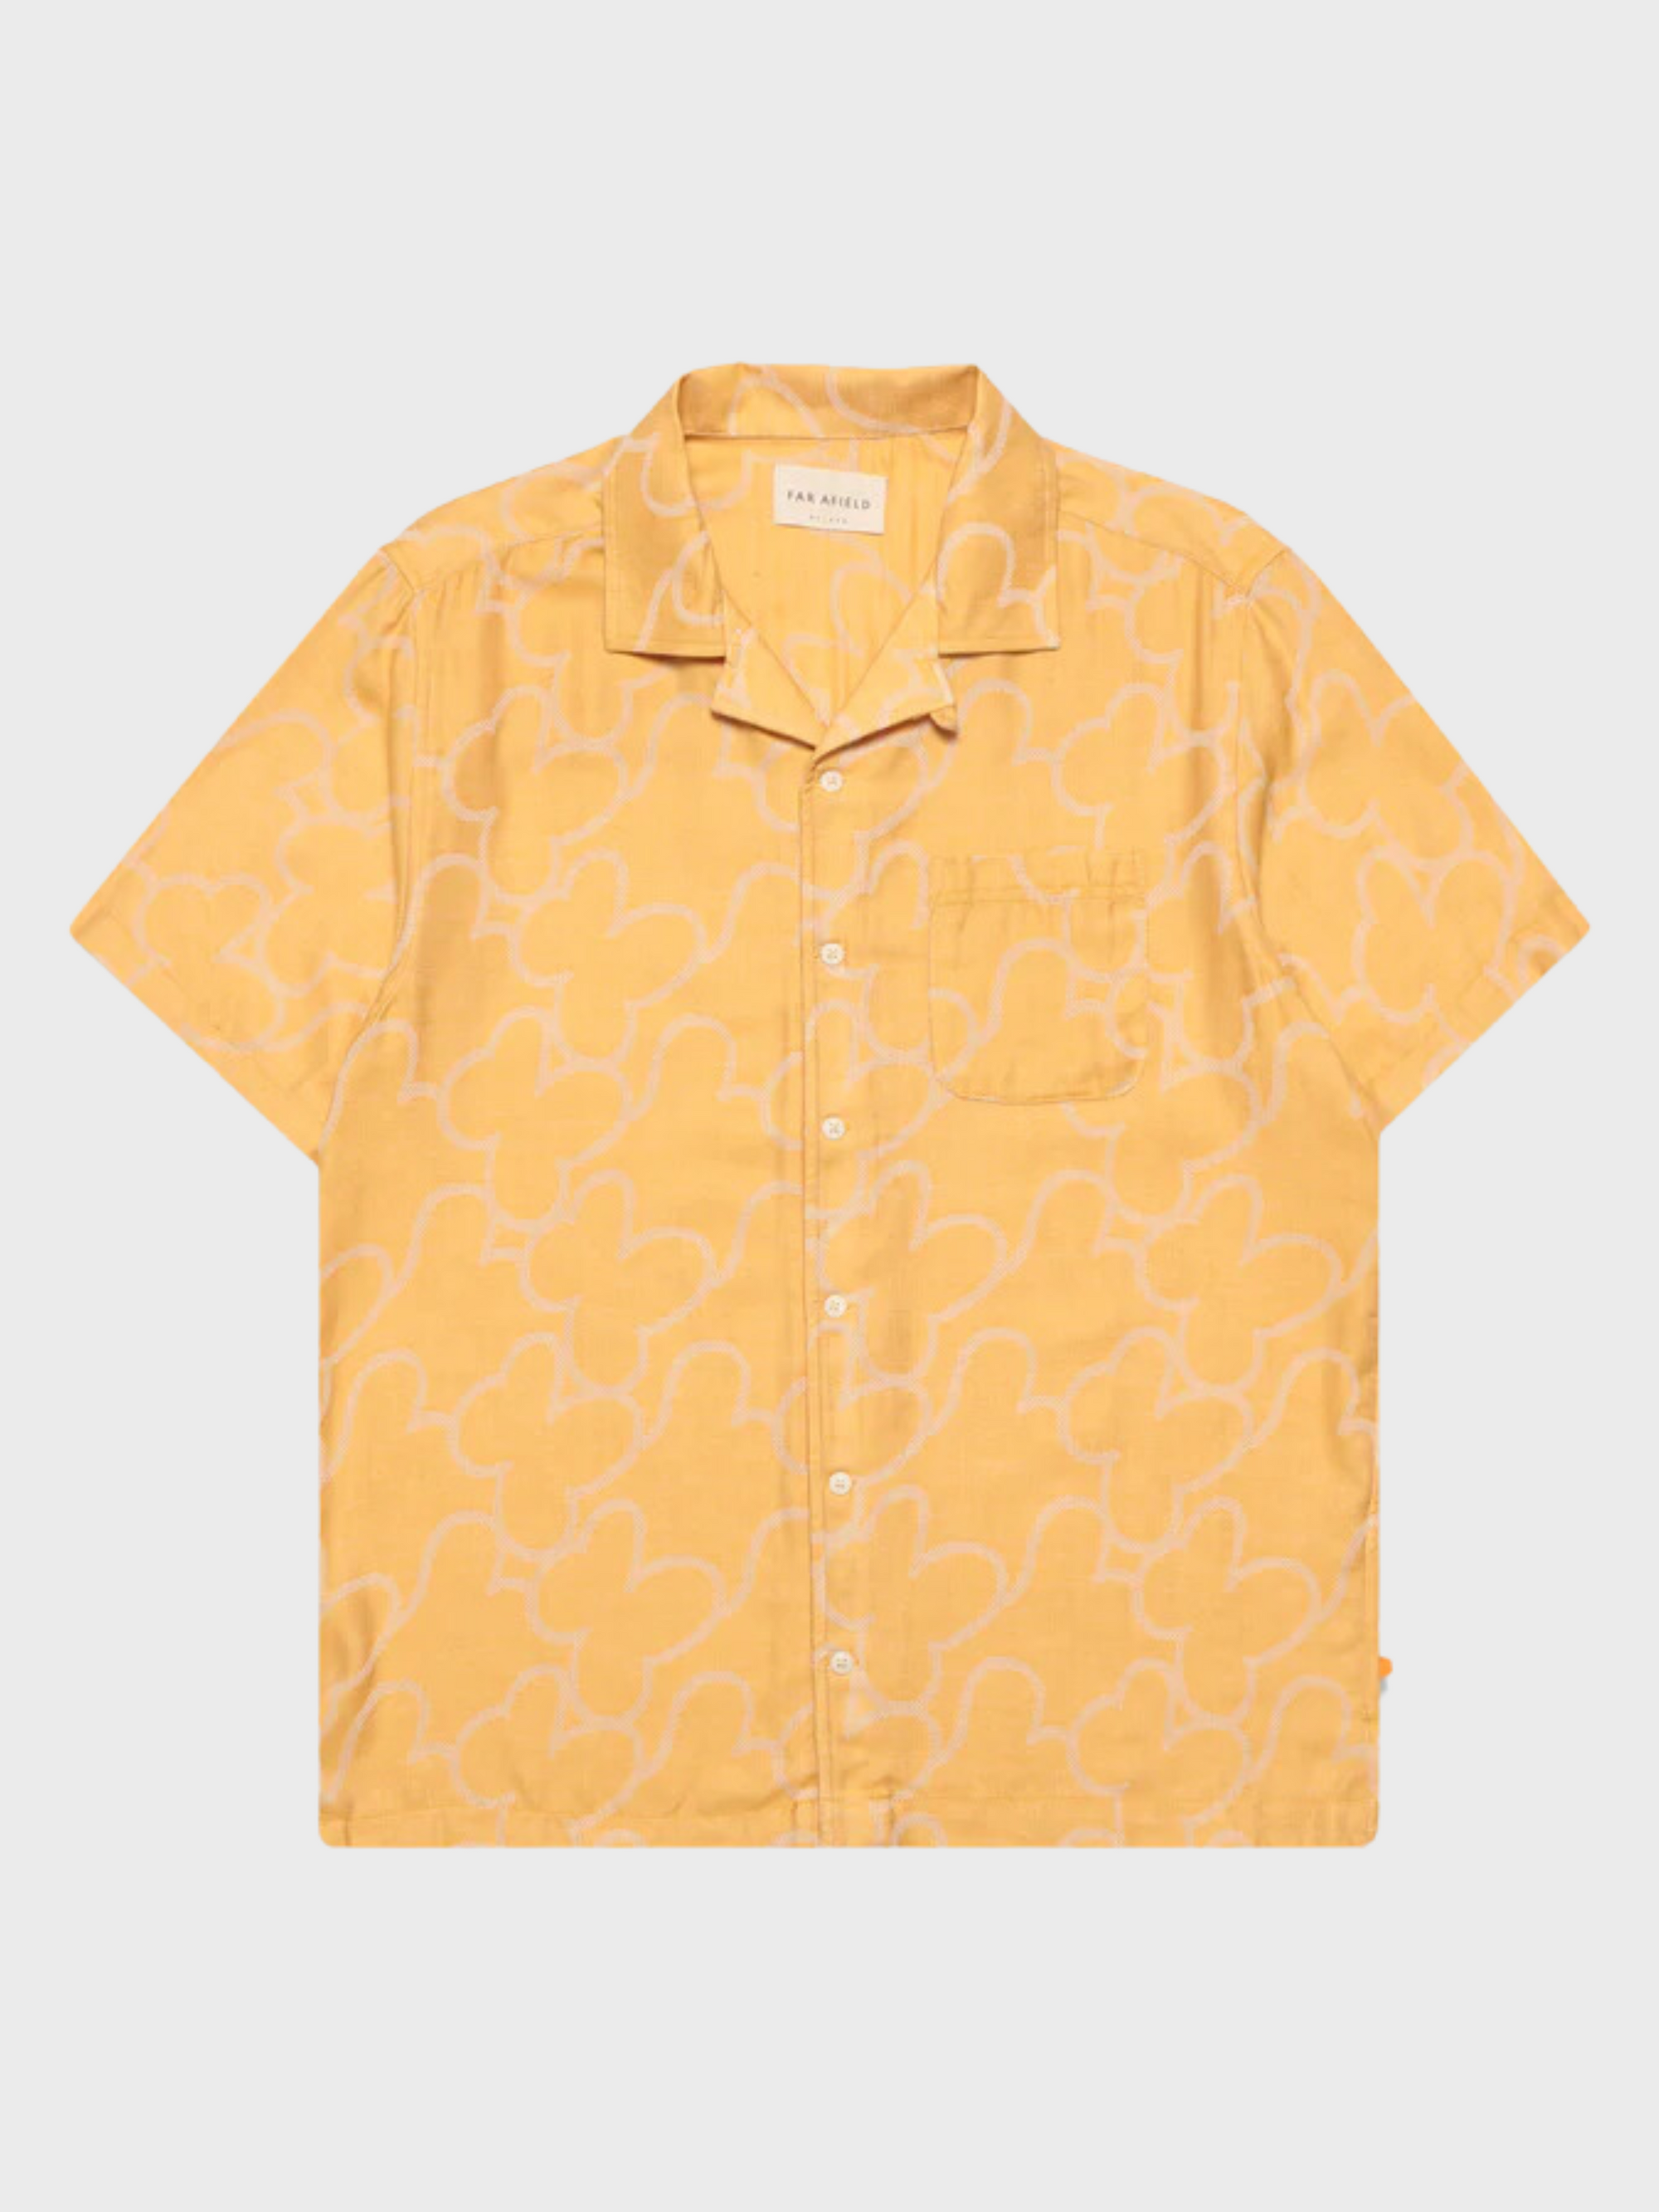 Far Afield Stachio SS Floral Jacquard Button Up Honey Gold SS24